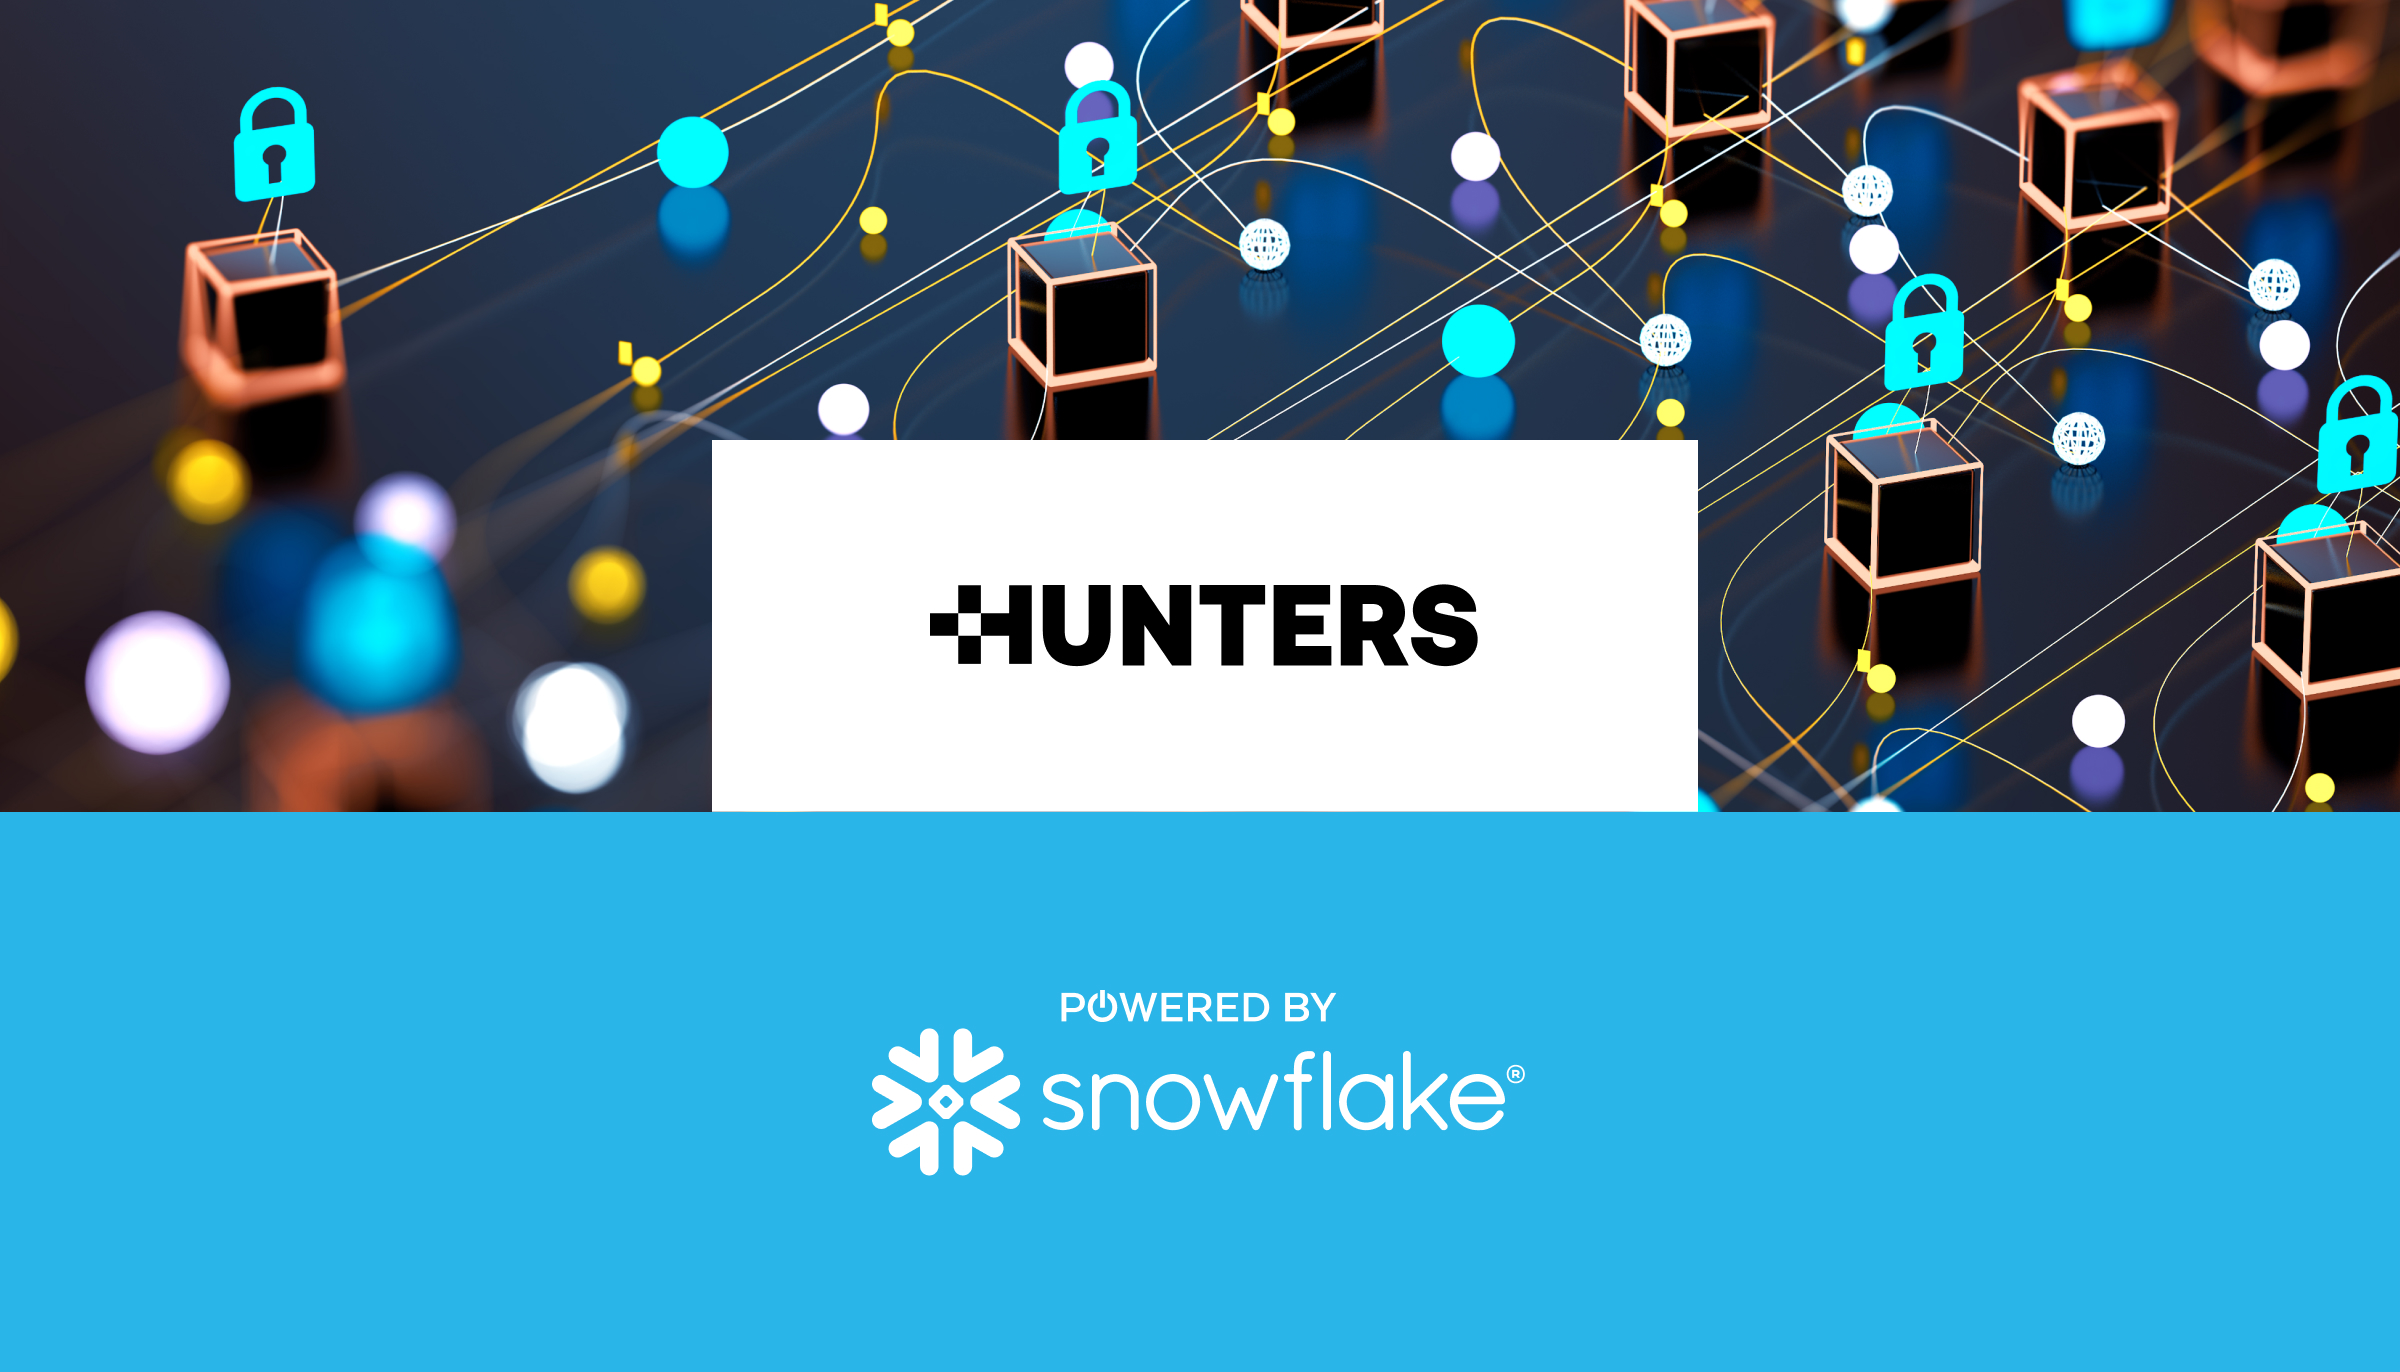 Powered by Snowflake: Why the Hunters Team Embraces a Connected App Model